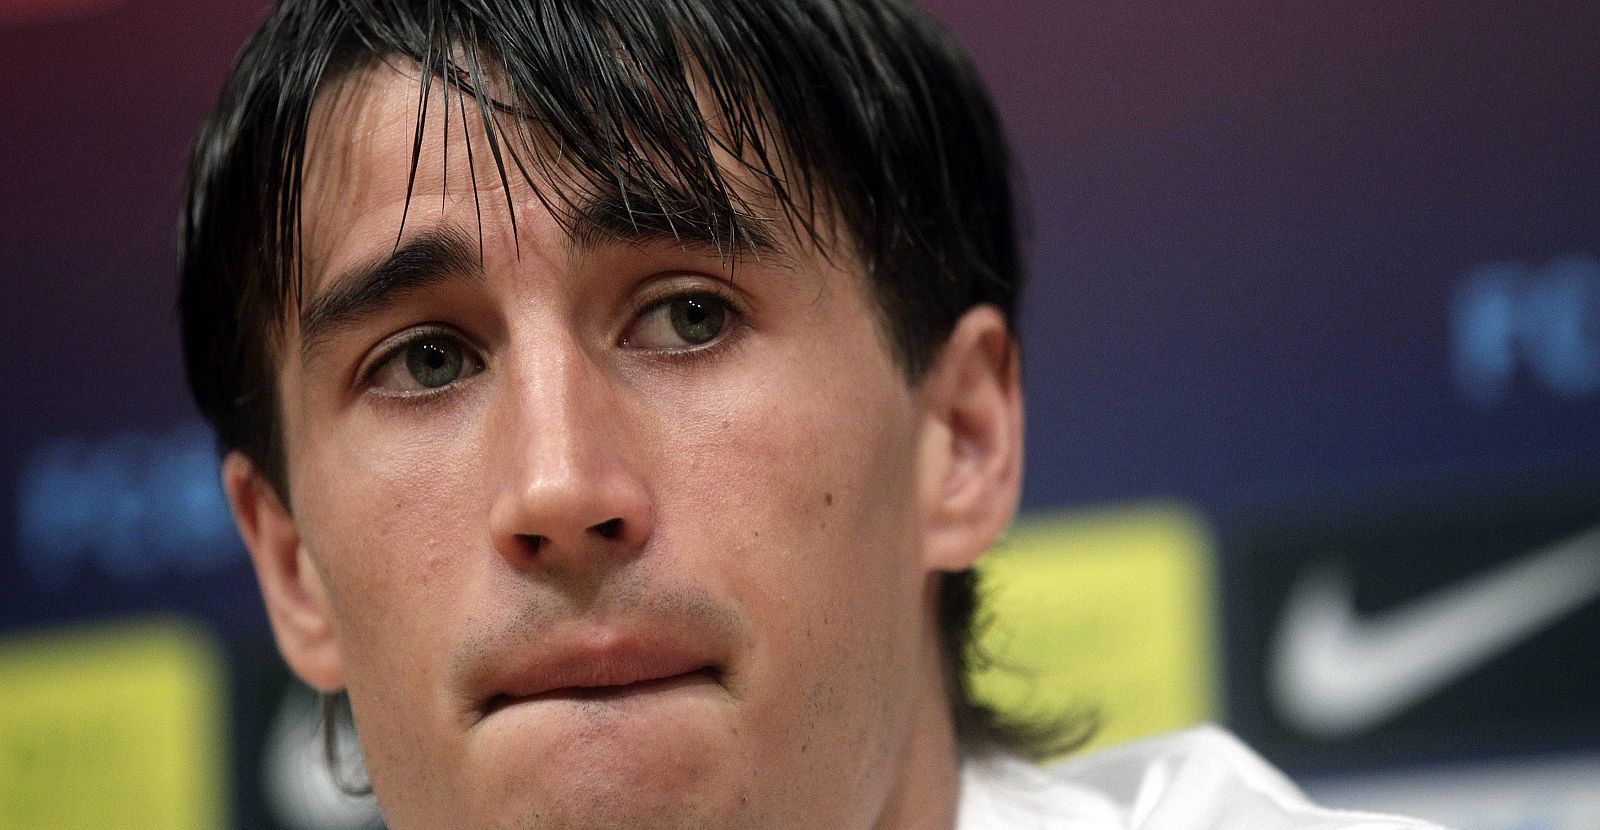 Spanish soccer player Bojan Krkic reacts during a news conference at Camp Nou stadium in Barcelona